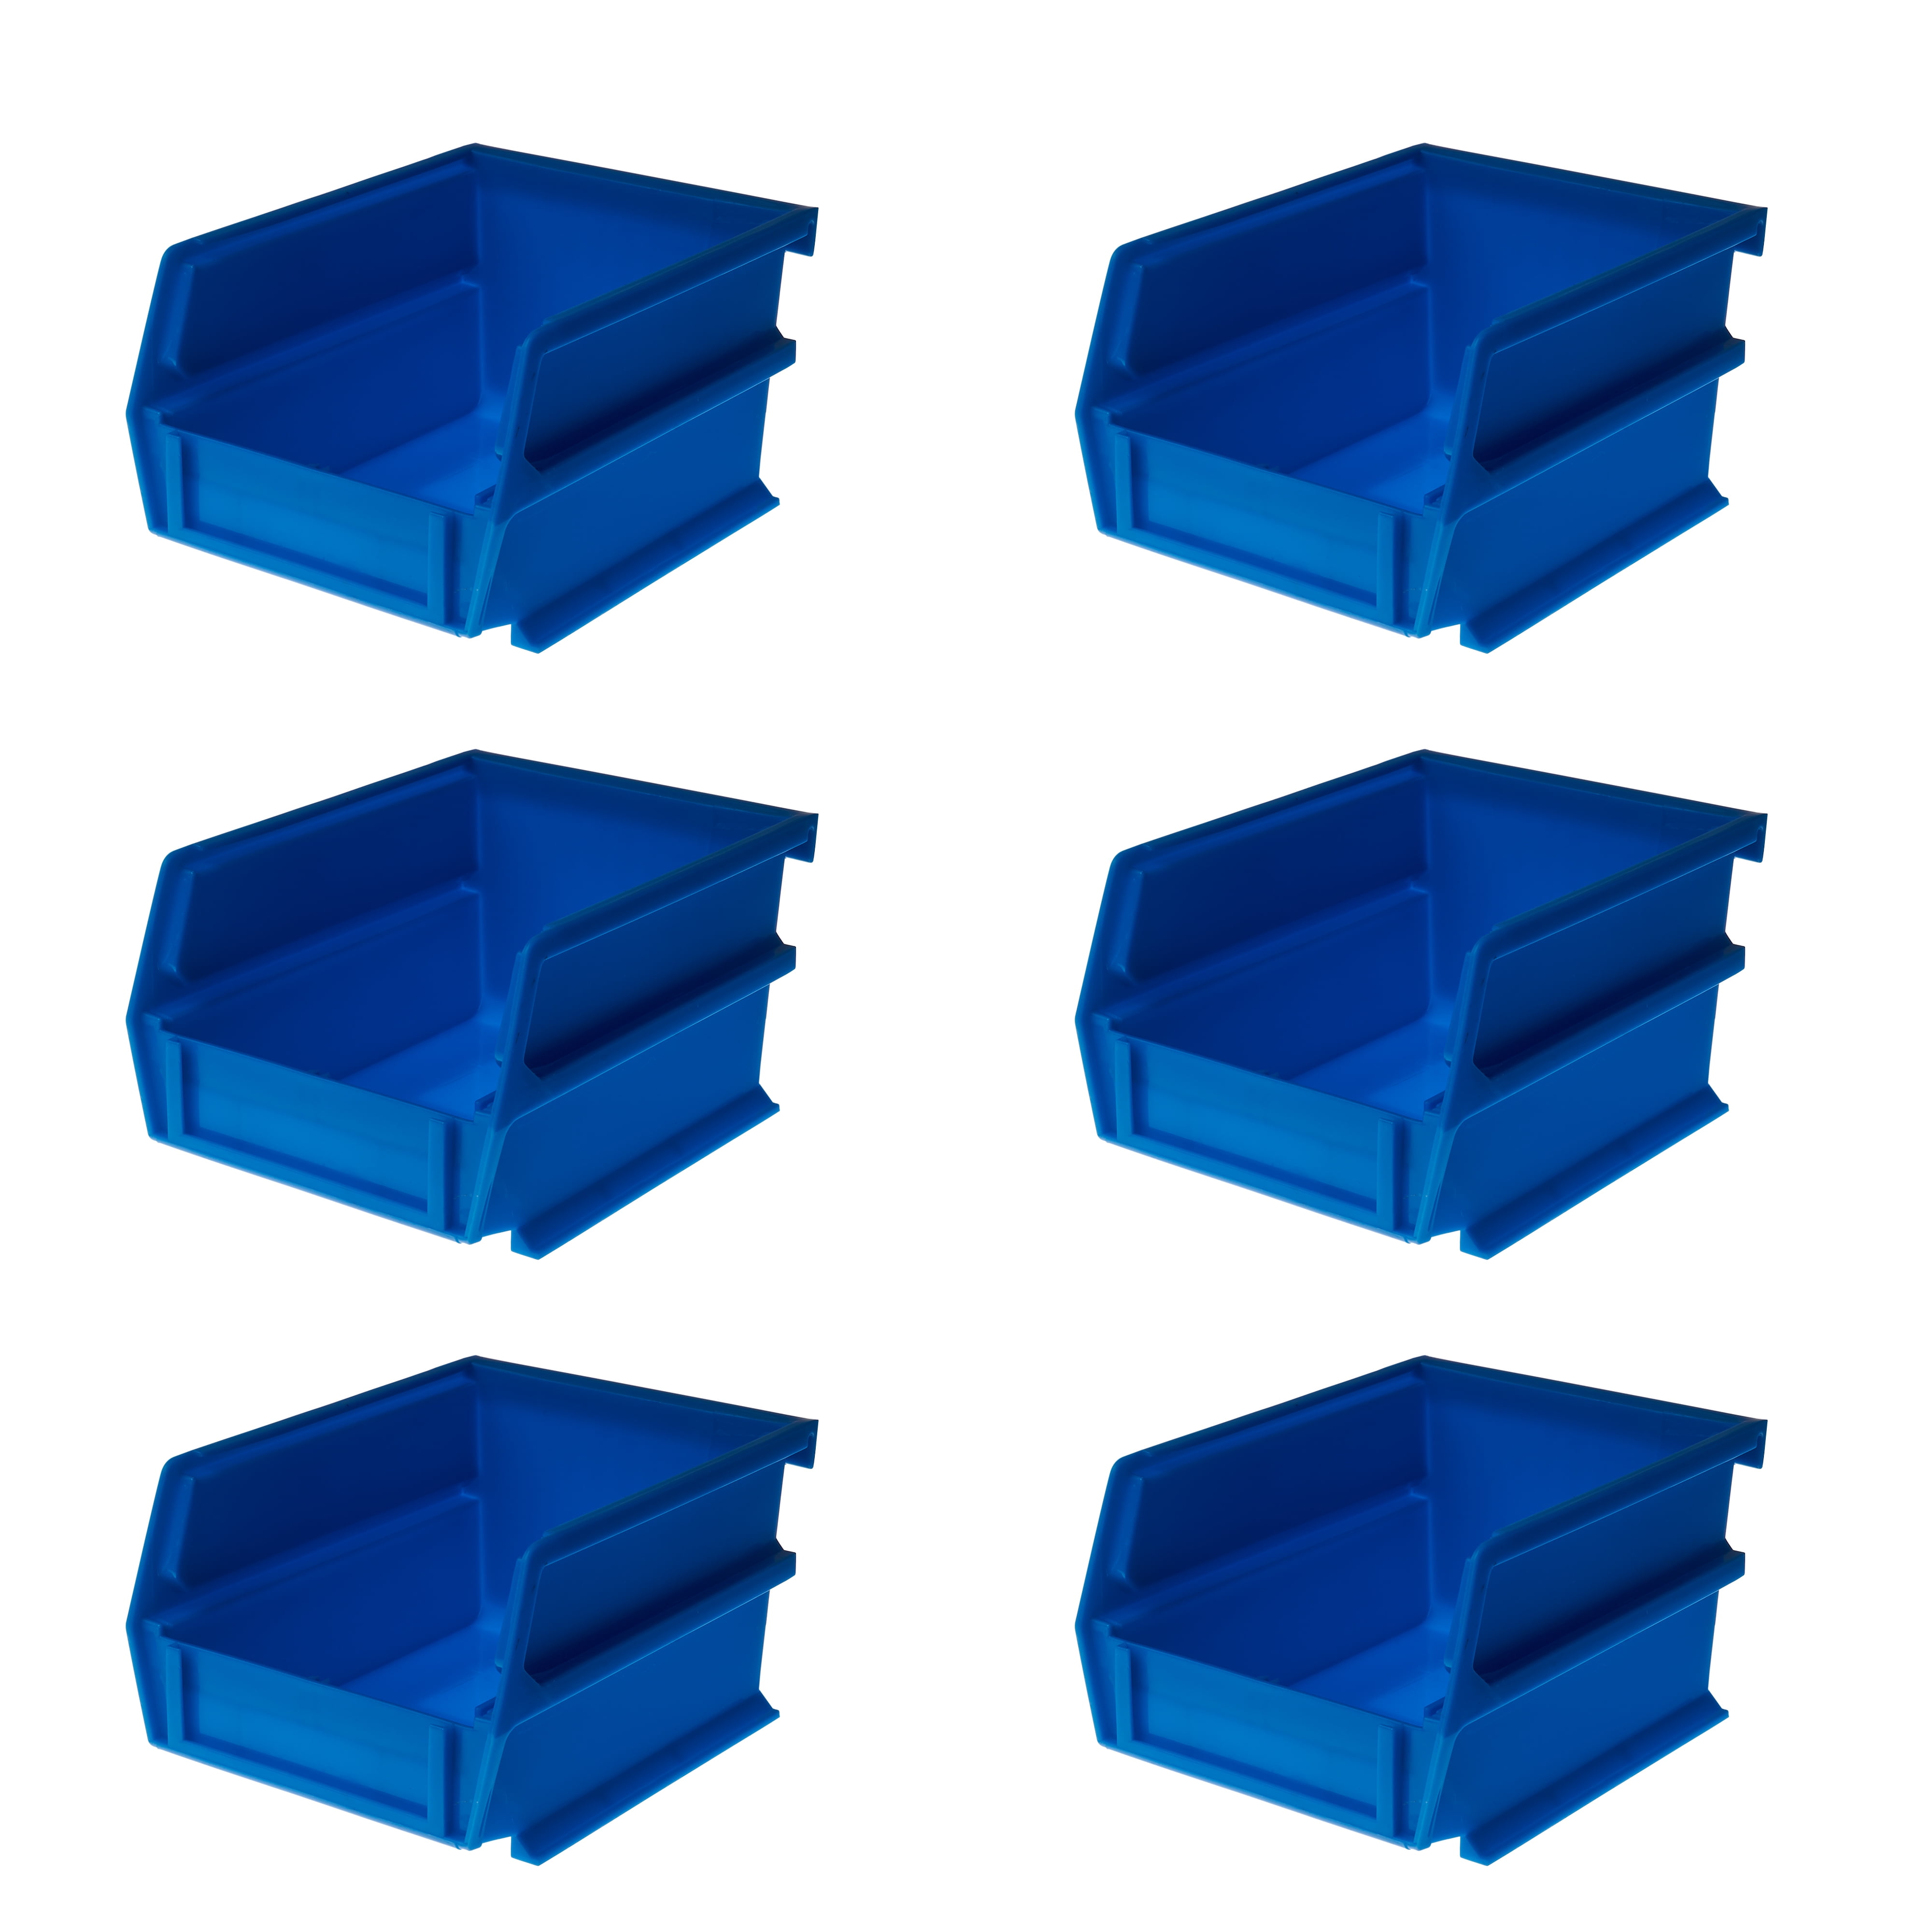 6 Storage Bins 5-3/8 X 4-1/8 X 3 inch Blue Plastic Small Parts Containers 